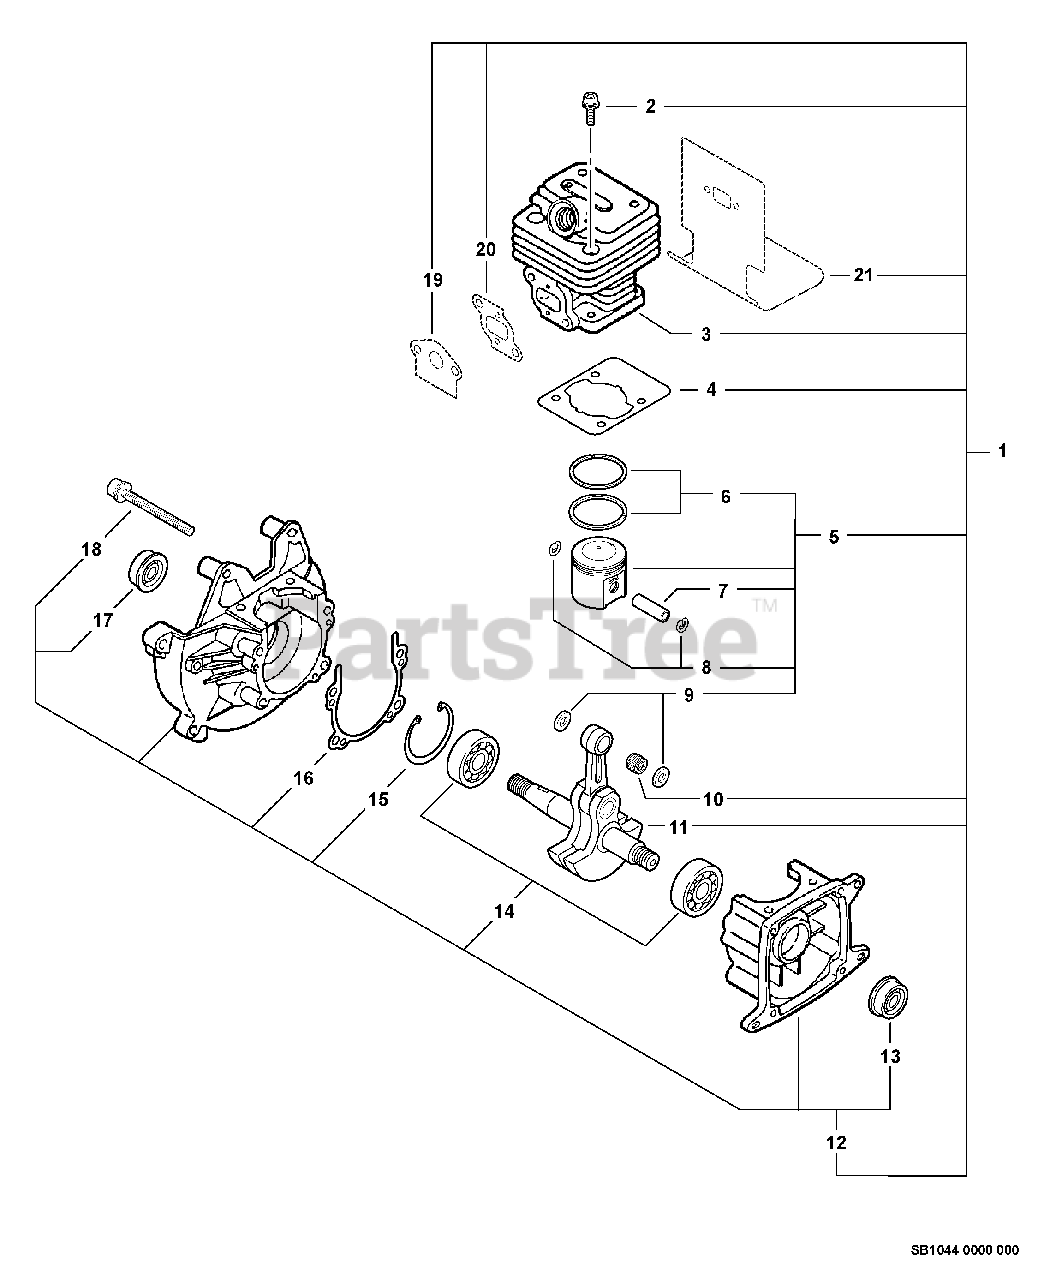 29 Echo Backpack Blower Parts Diagram - Wiring Diagram Info